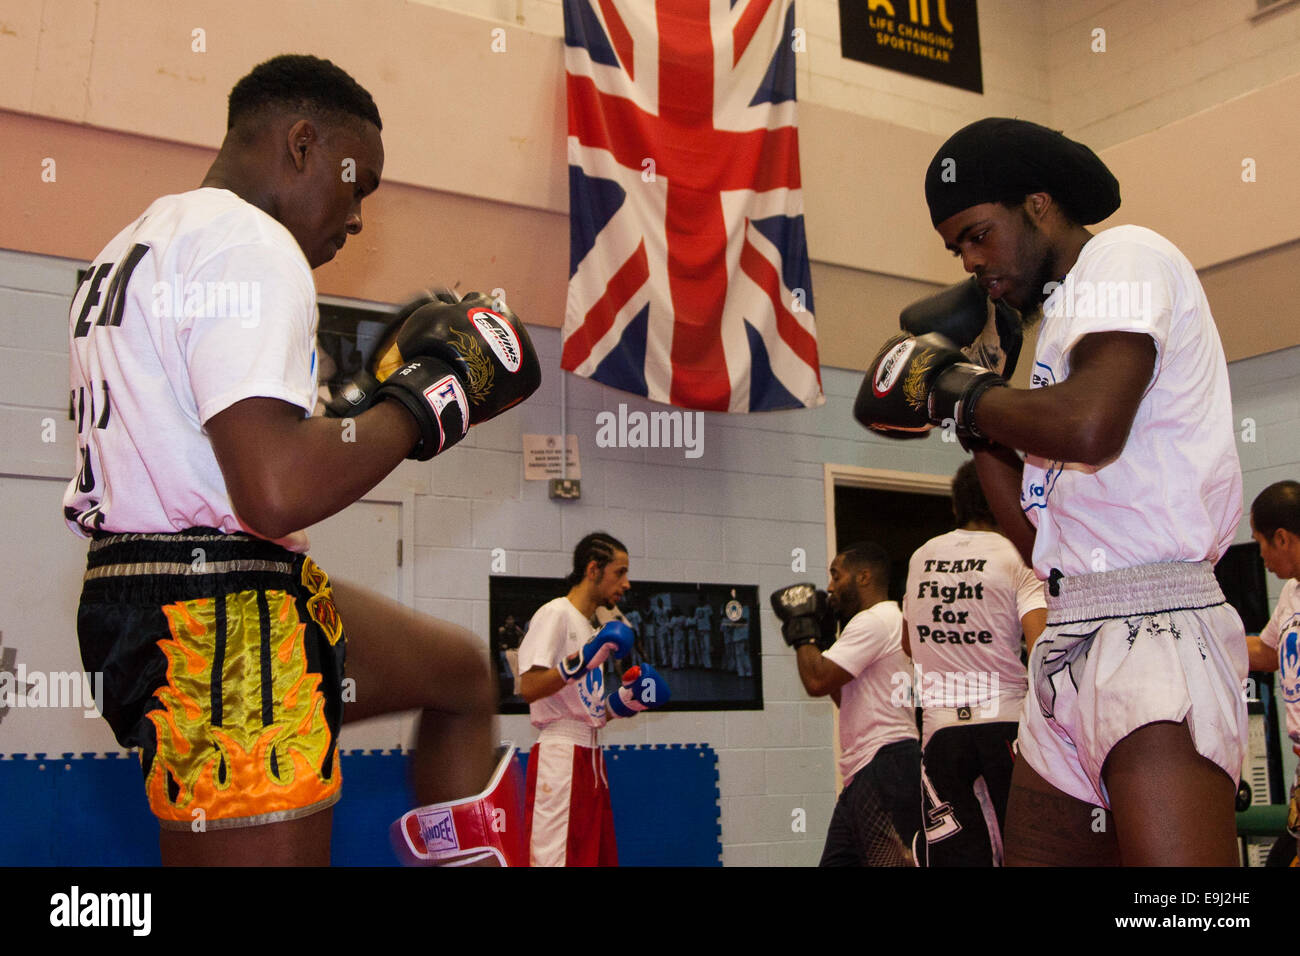 London, UK. 28th October, 2014.  The Mayor of London, Boris Johnson, visits a training session at Fight for Peace Academy in Newham. Fight for Peace uses boxing and martial arts combined with education and personal development to realise the potential of young people in the borough at risk of crime and violence. First established in Rio in 2000 by Luke Dowdney MBE, it was replicated in Newham in 2007. It is now expanding globally and began rolling out across the UK. Pictured: Youth at Fight For Peace practice their kick boxing as they await the arrival of Boris Johnson. © Paul Davey/Alamy Live Stock Photo